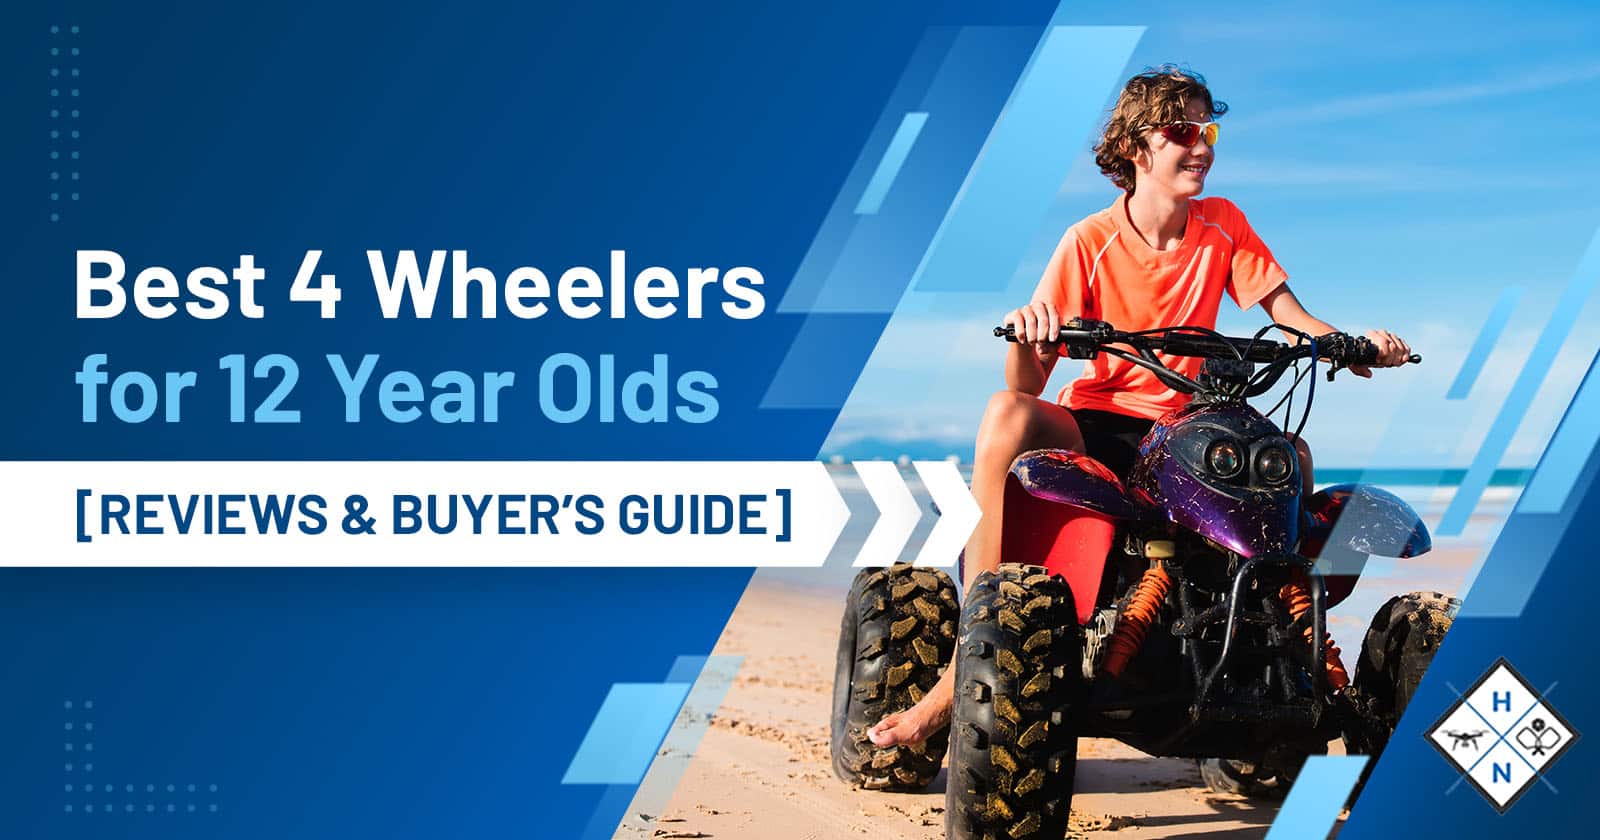 Best 4 Wheelers for 12 Year Olds [REVIEWS & BUYER’S GUIDE]